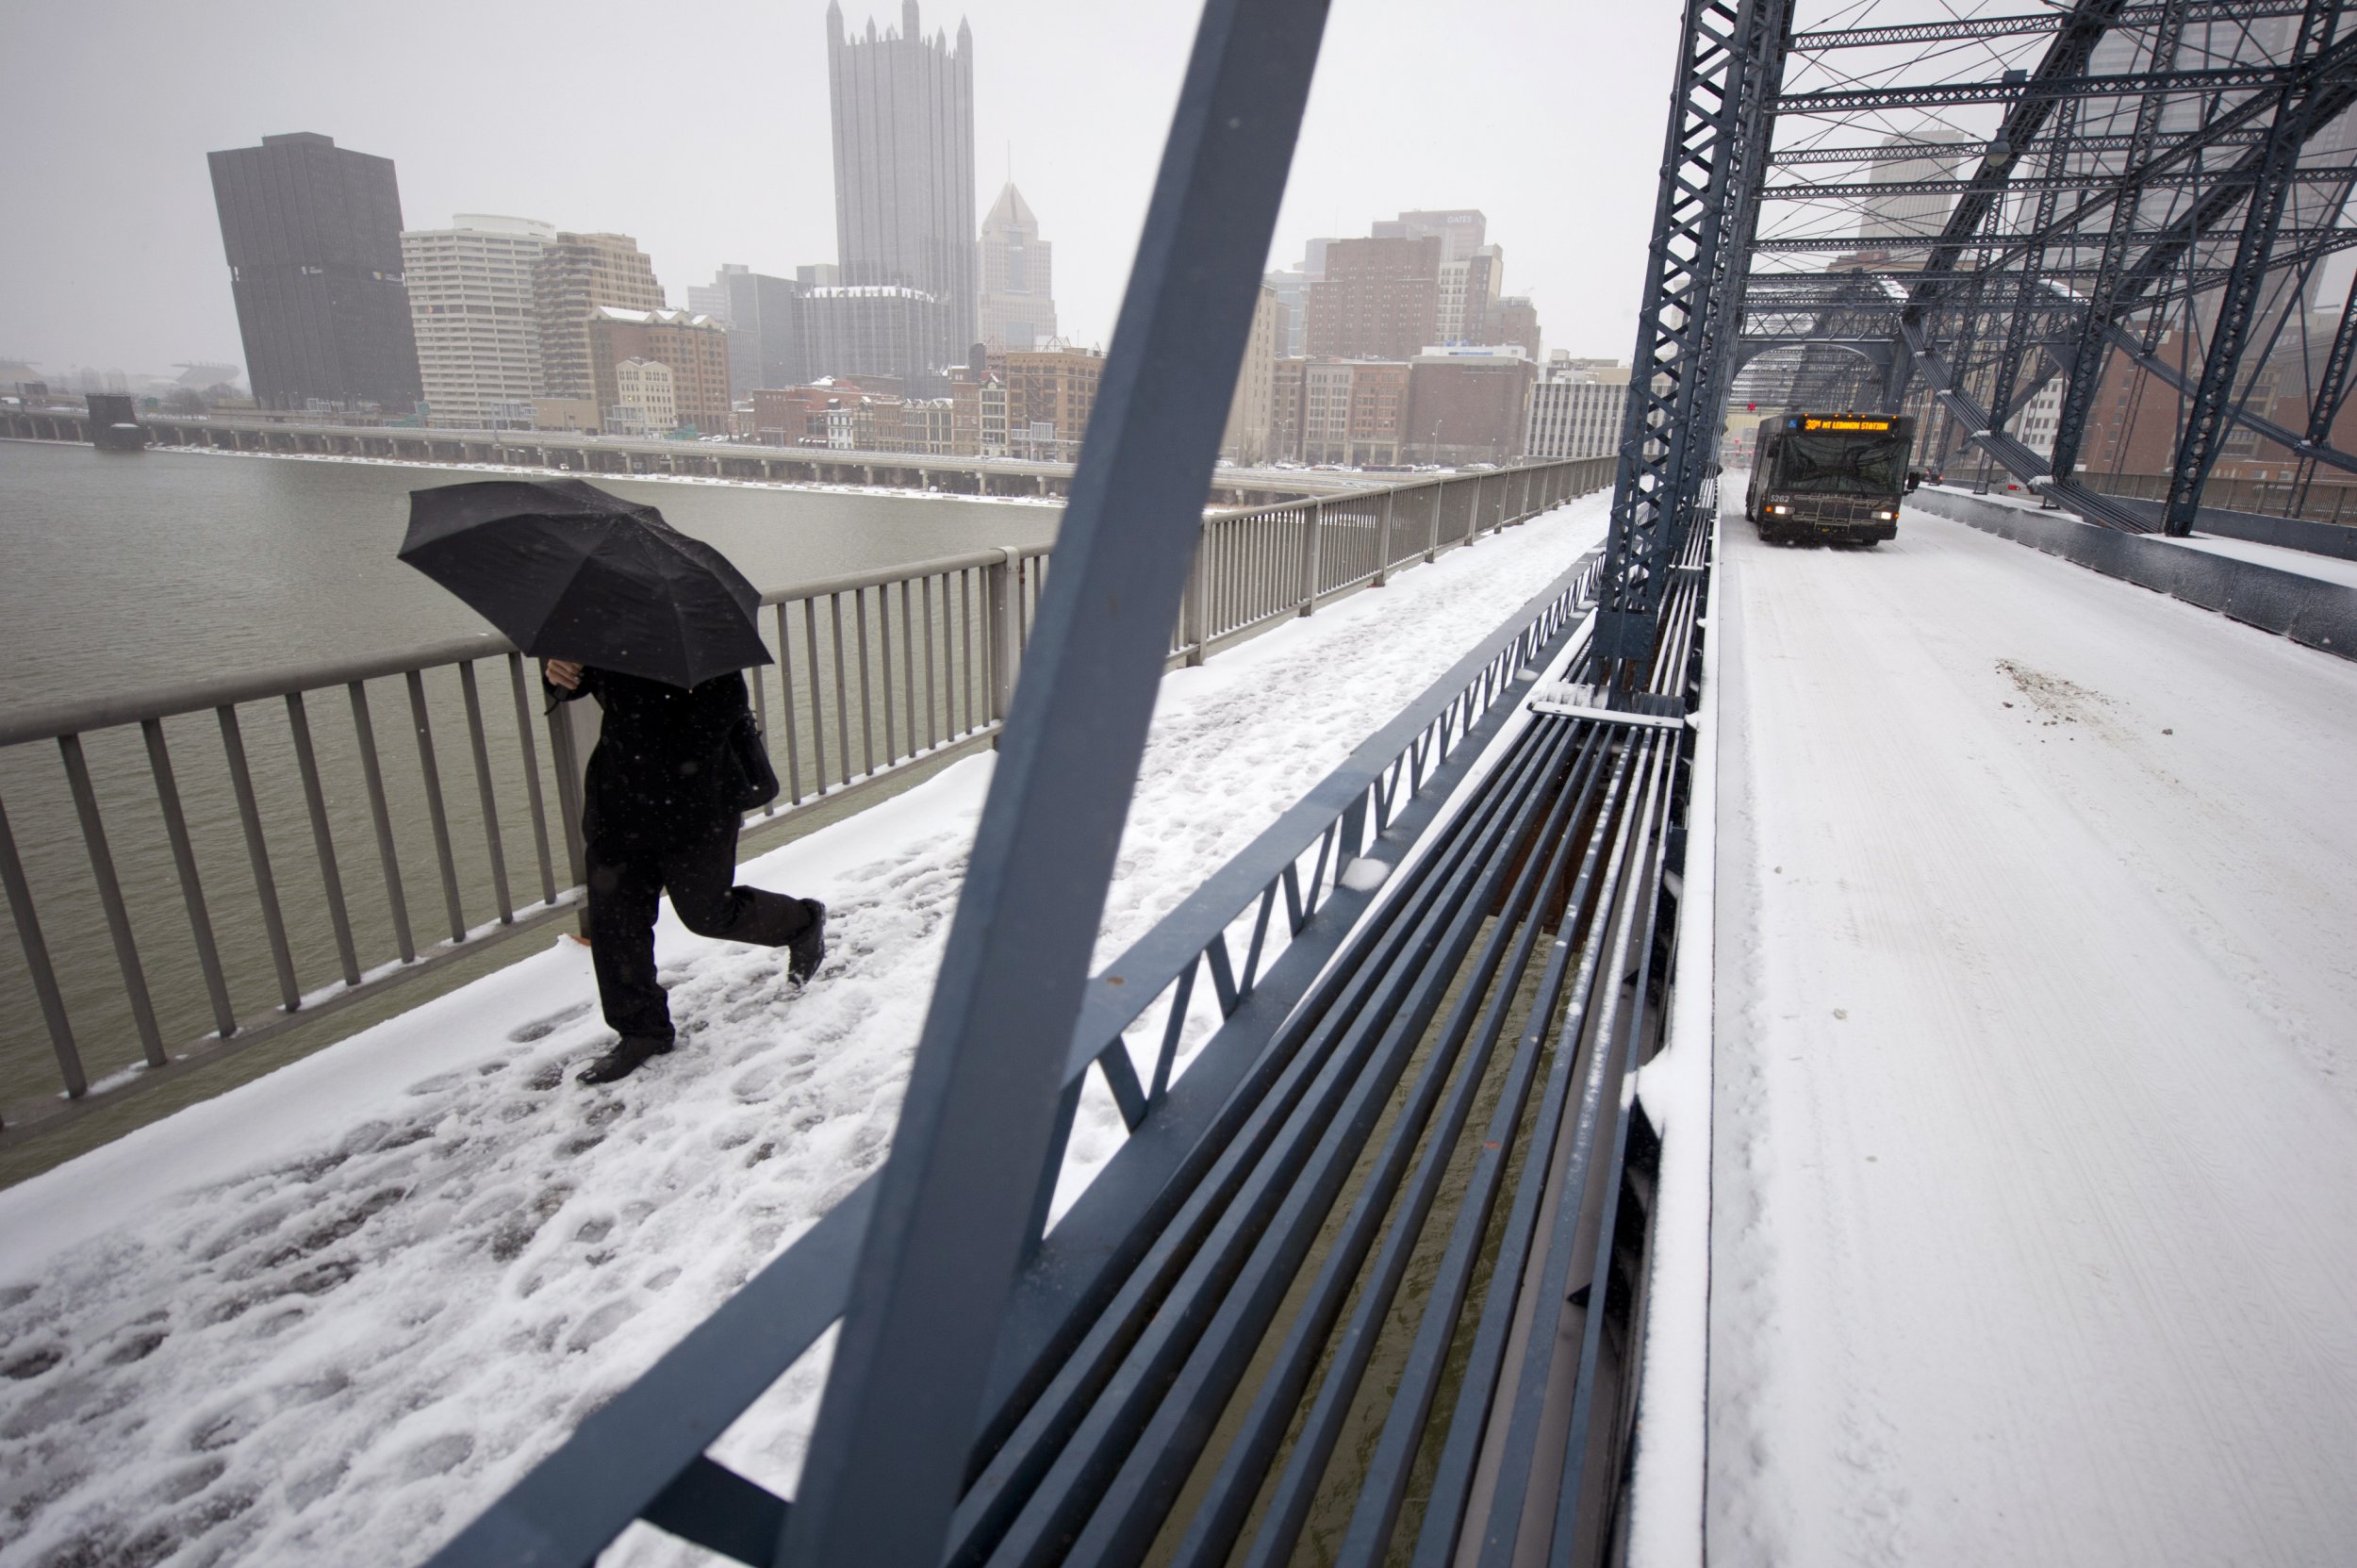 Snow Totals in Pittsburgh, Philadelphia From Winter Storm Petra